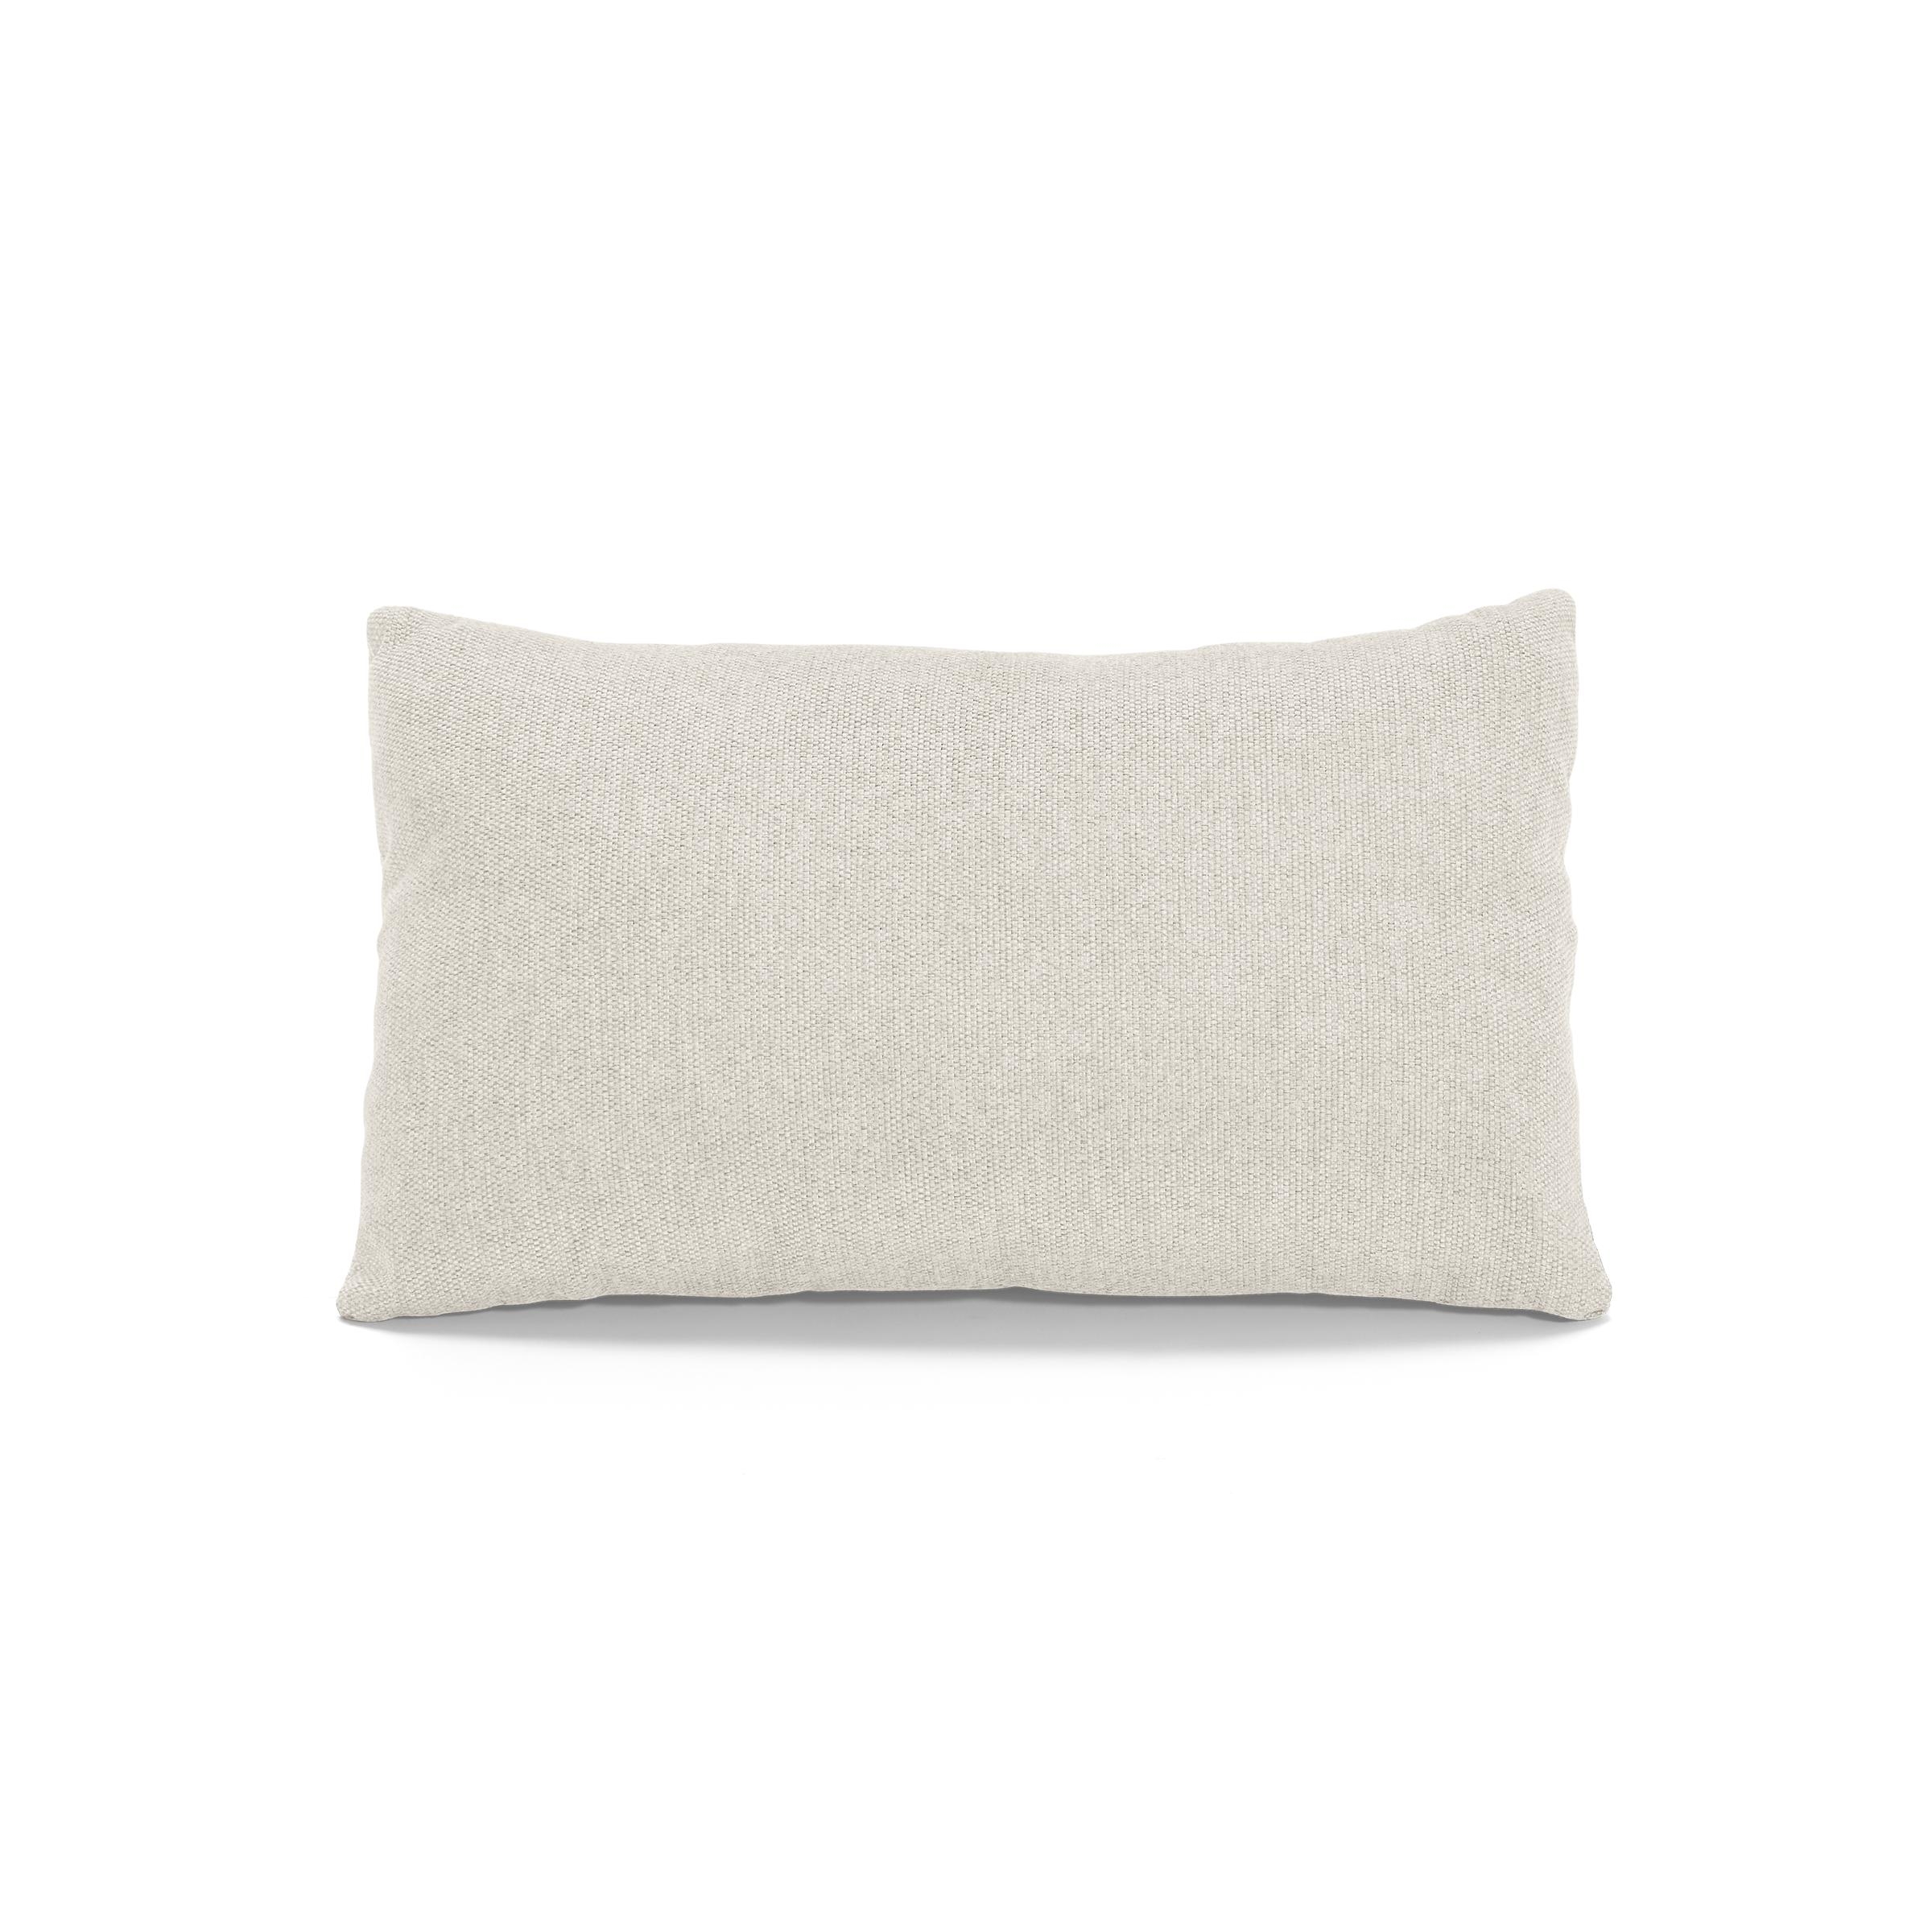 Nomad Lumbar Pillow in Ivory - Image 0